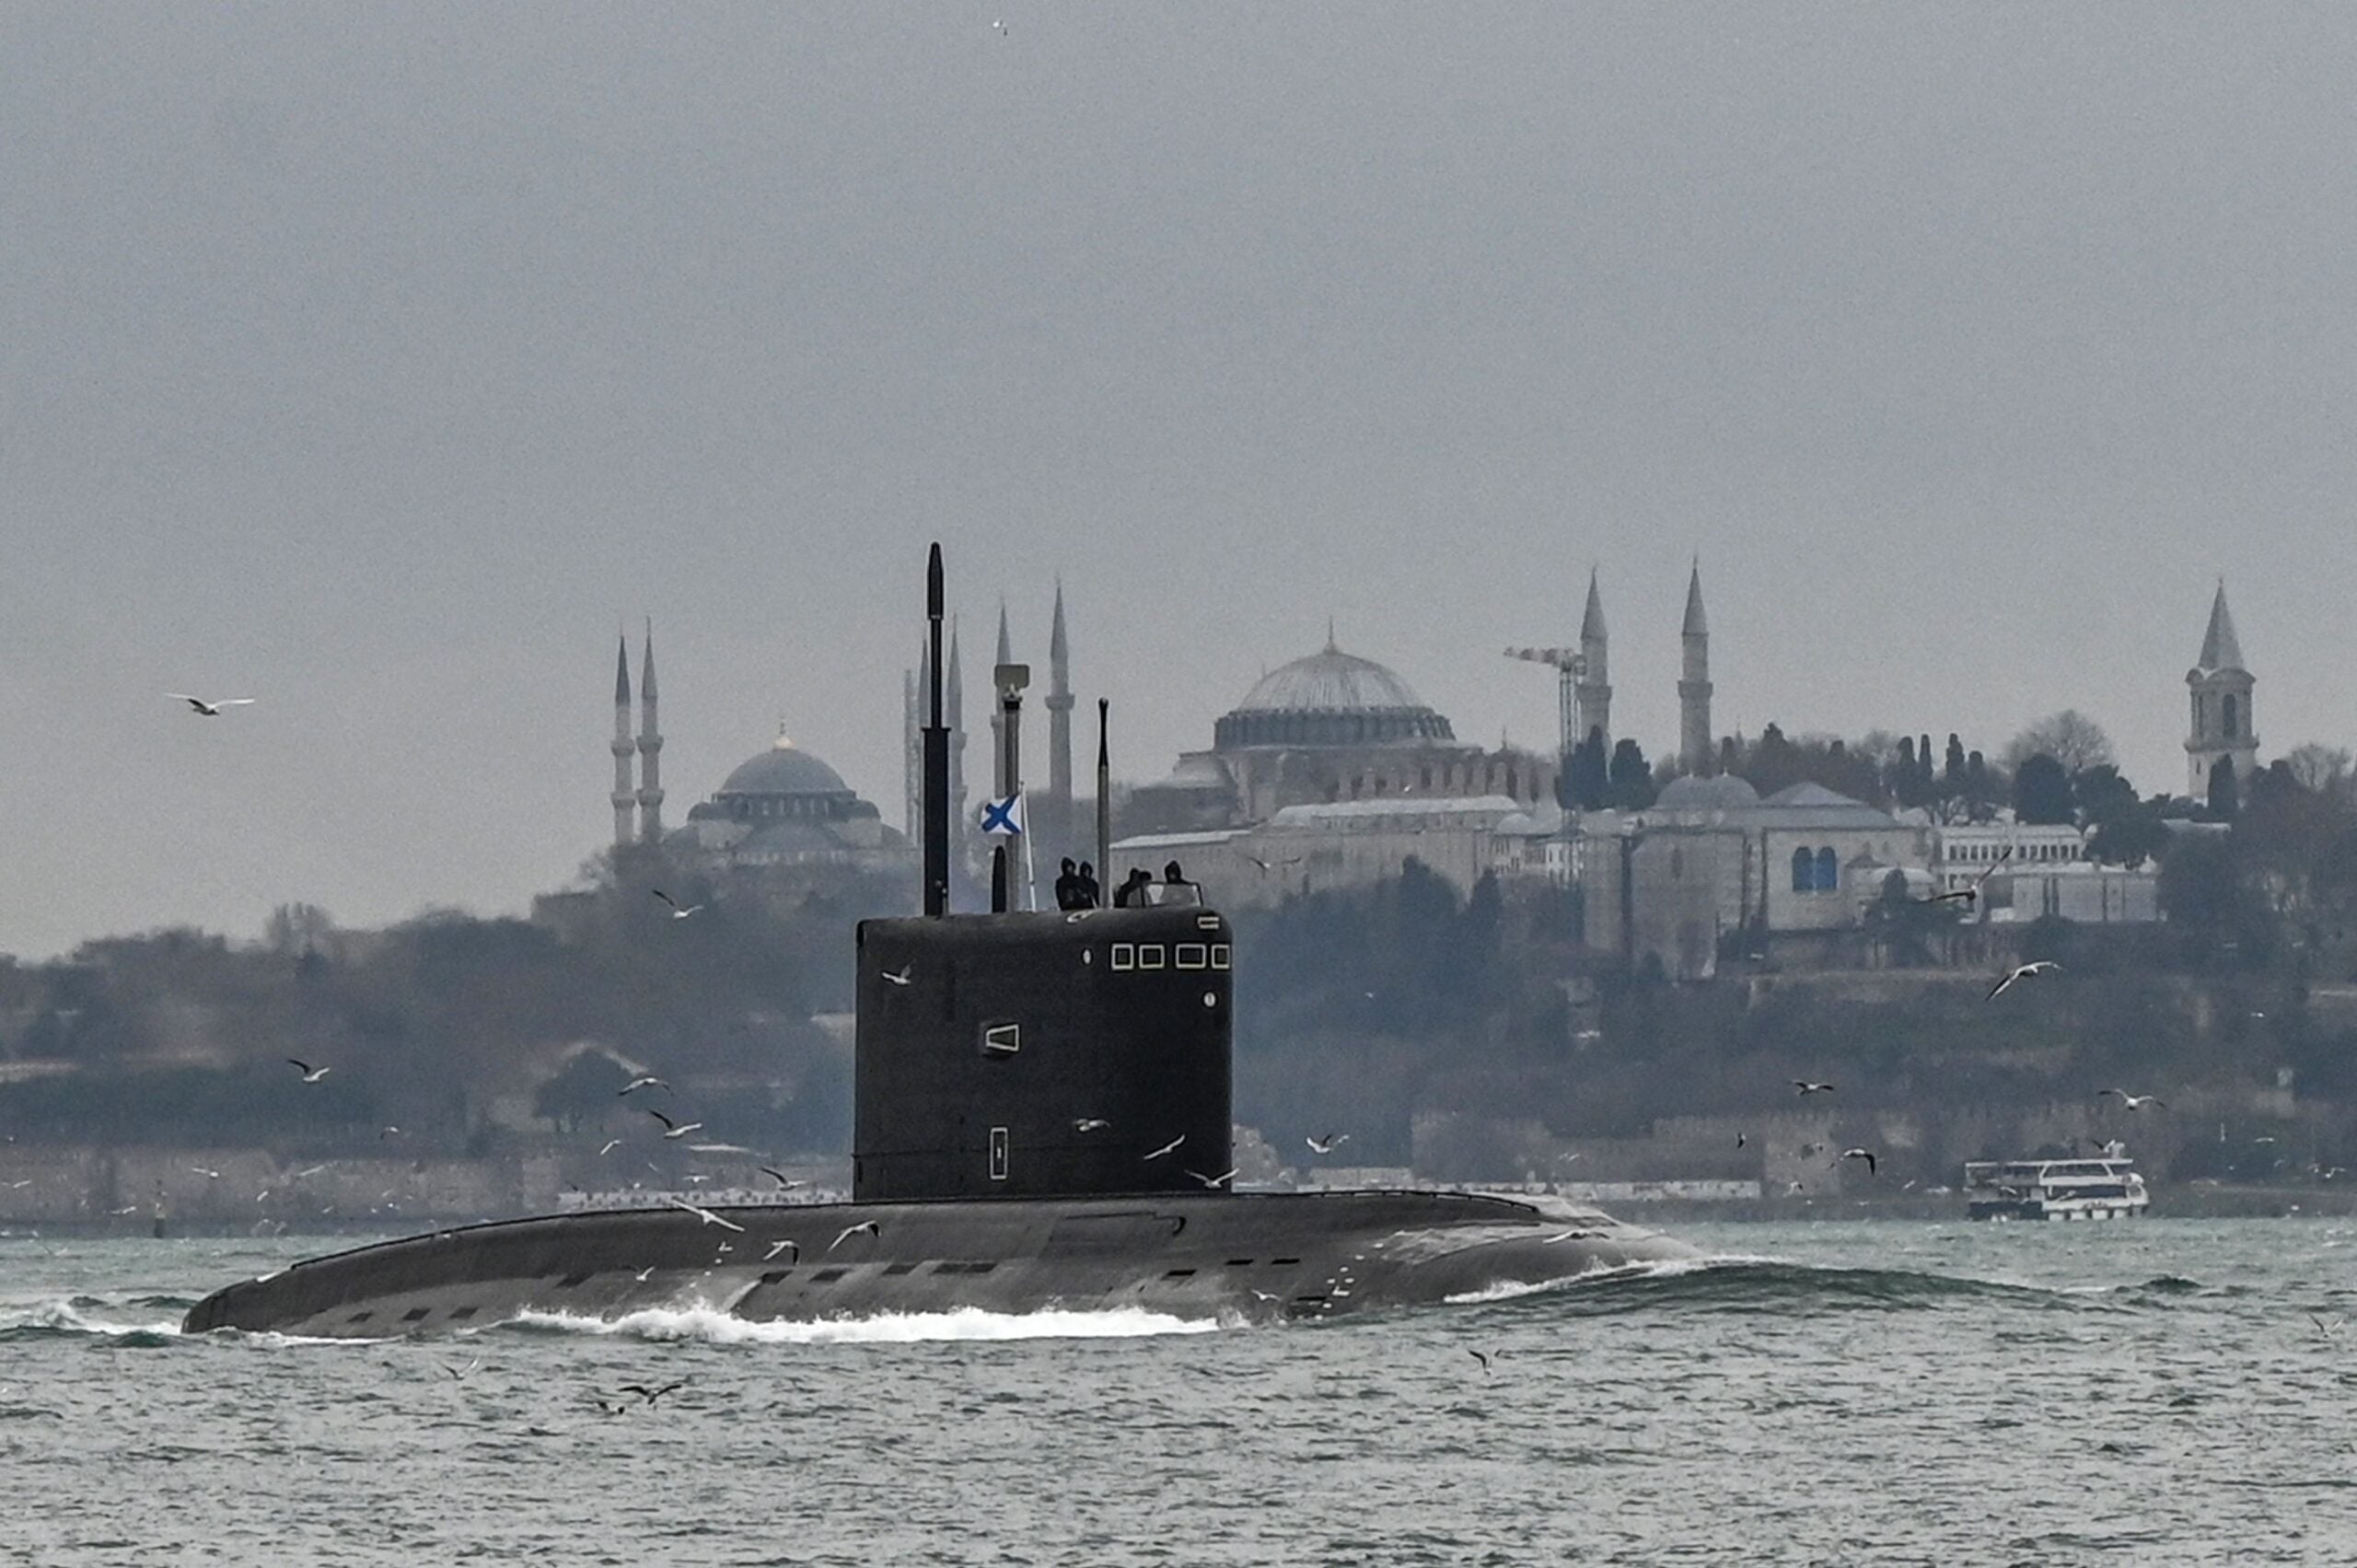 TOPSHOT - Russian Navy's diesel-electric Kilo class submarine Rostov-on-Don sails with an naval ensign of the Russian Federation, also known in Russian as The Andreyevsky Flag on it through the Bosphorus Strait on the way to the Black Sea past the city Istanbul as Sultanahmet mosque (L) and Hagia Sophia mosque (R) are seen in the backround on February 13, 2022. (Photo by Ozan KOSE / AFP) (Photo by OZAN KOSE/AFP via Getty Images)